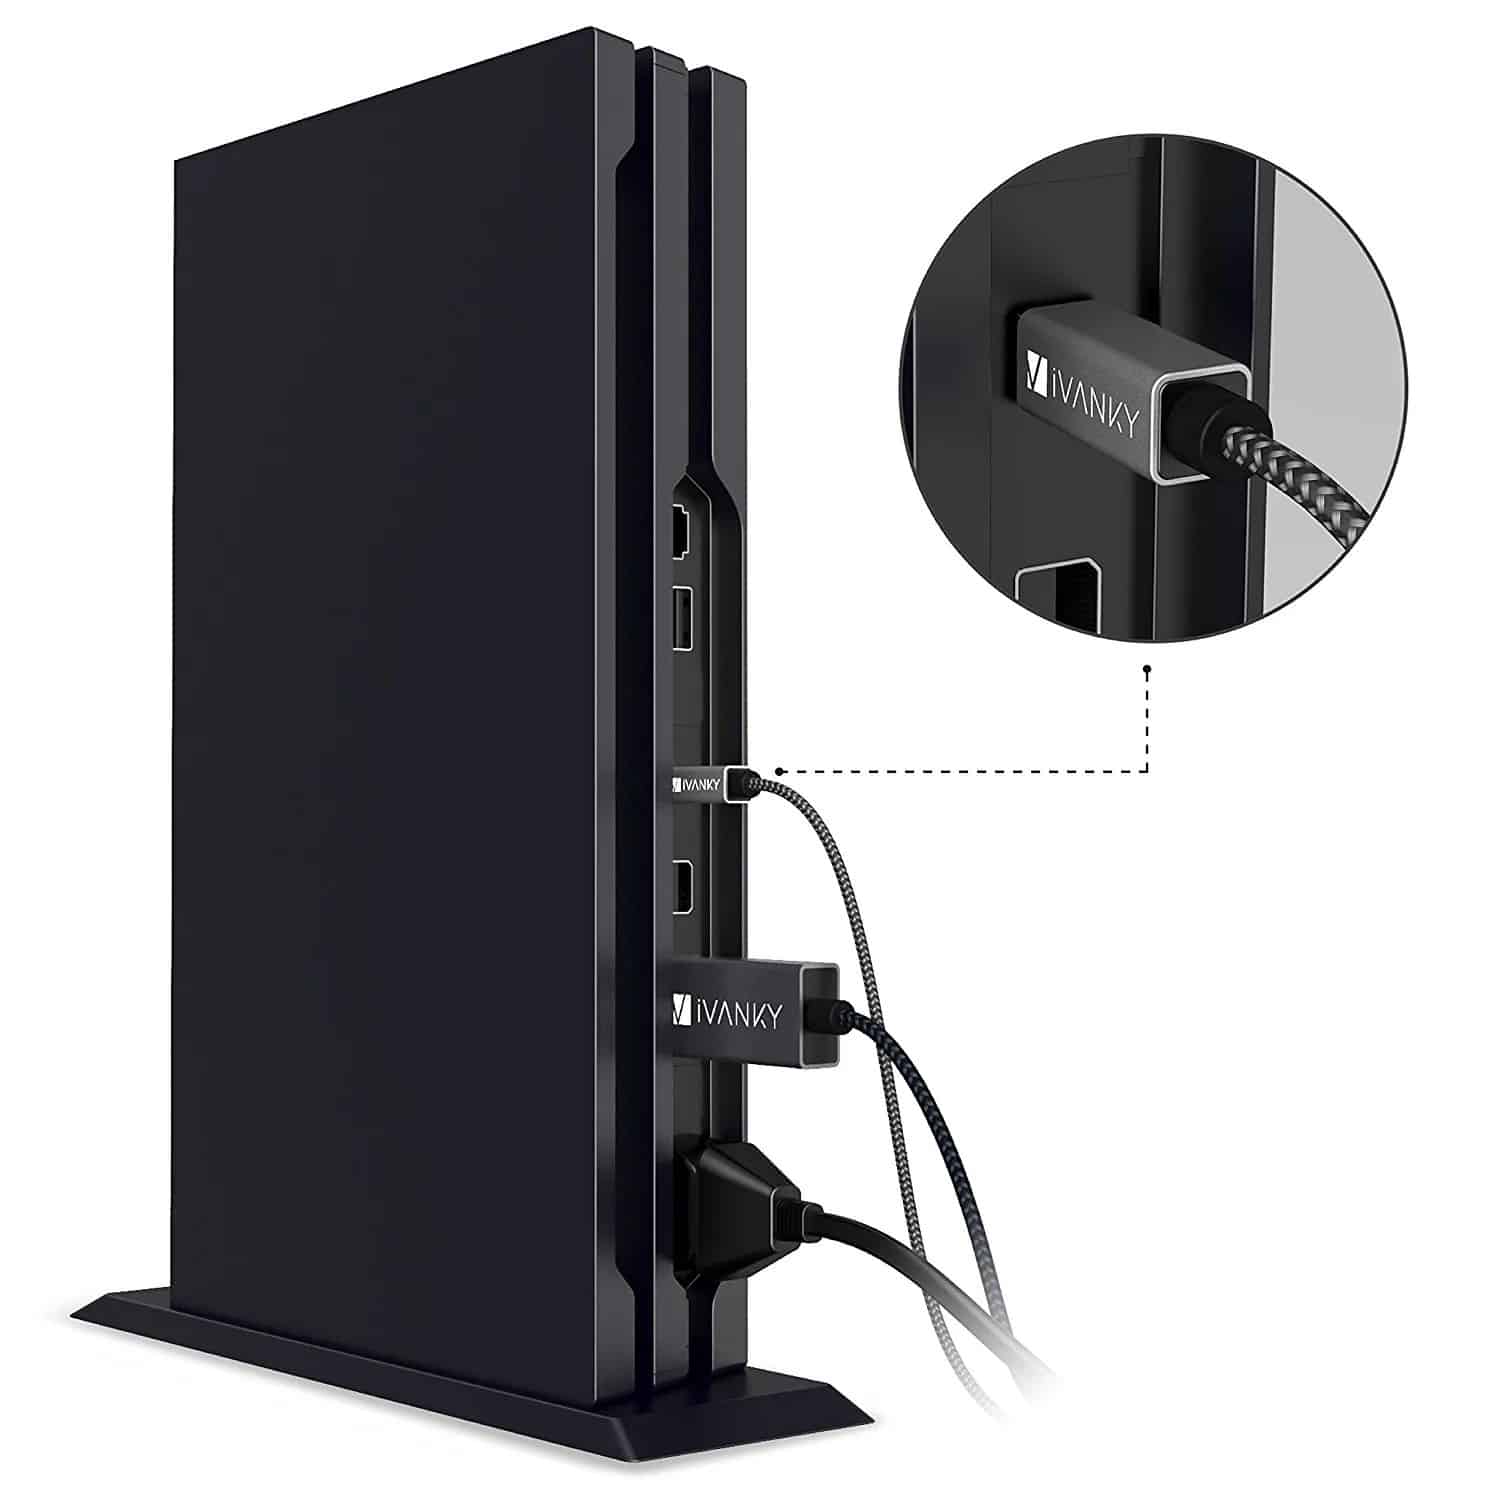 PlayStation 4 External Speakers Connection works for all PS4 Versions